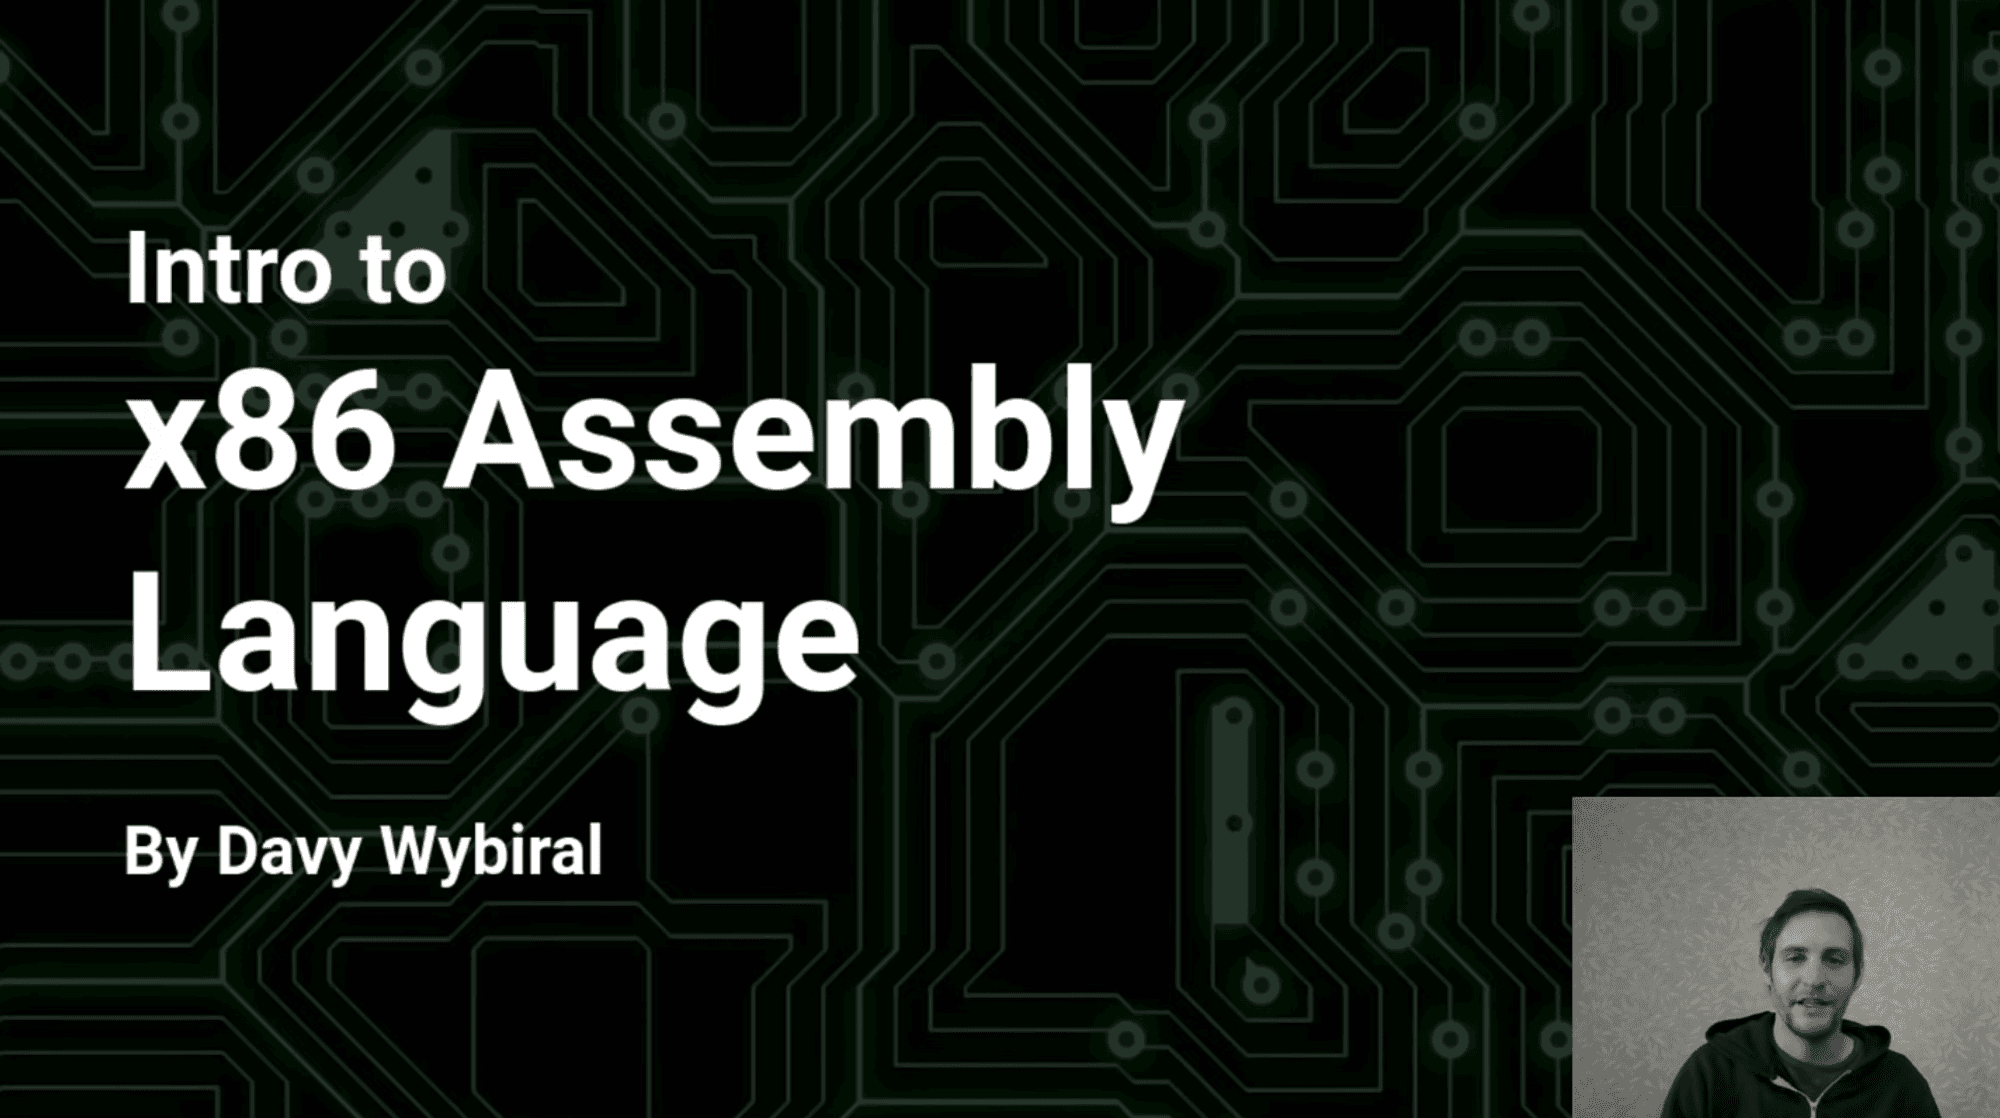 Intro to x86 Assembly Language by David Wybiral